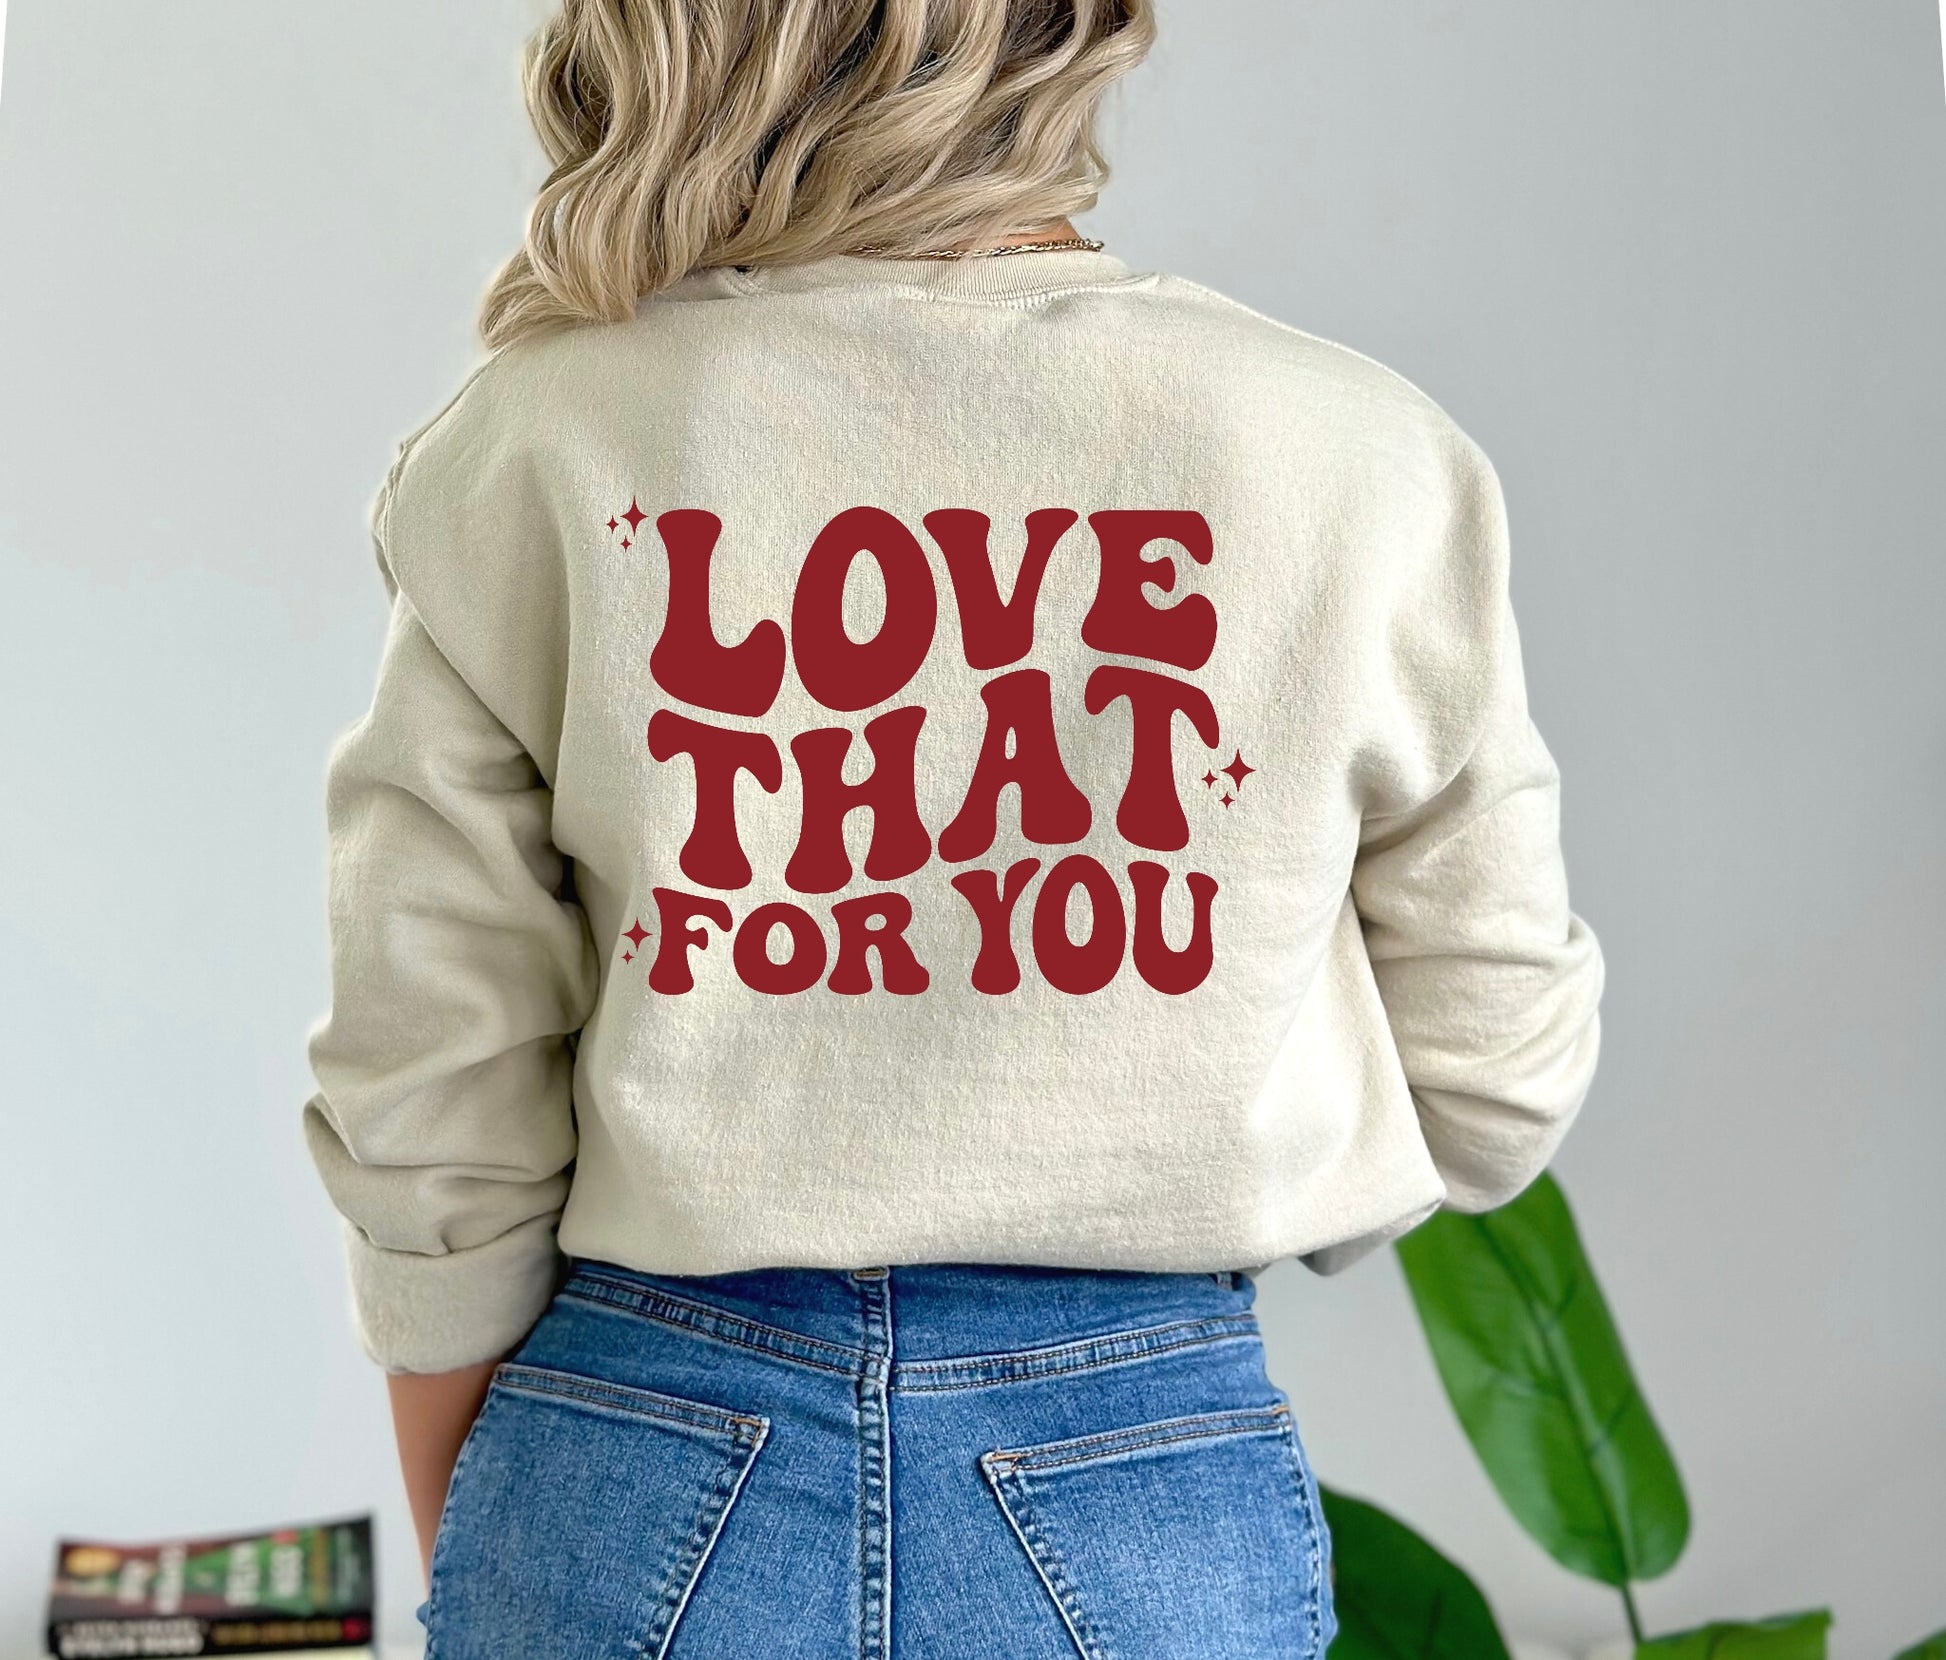 Polycotton sweatshirt printed with text love that for you at the back